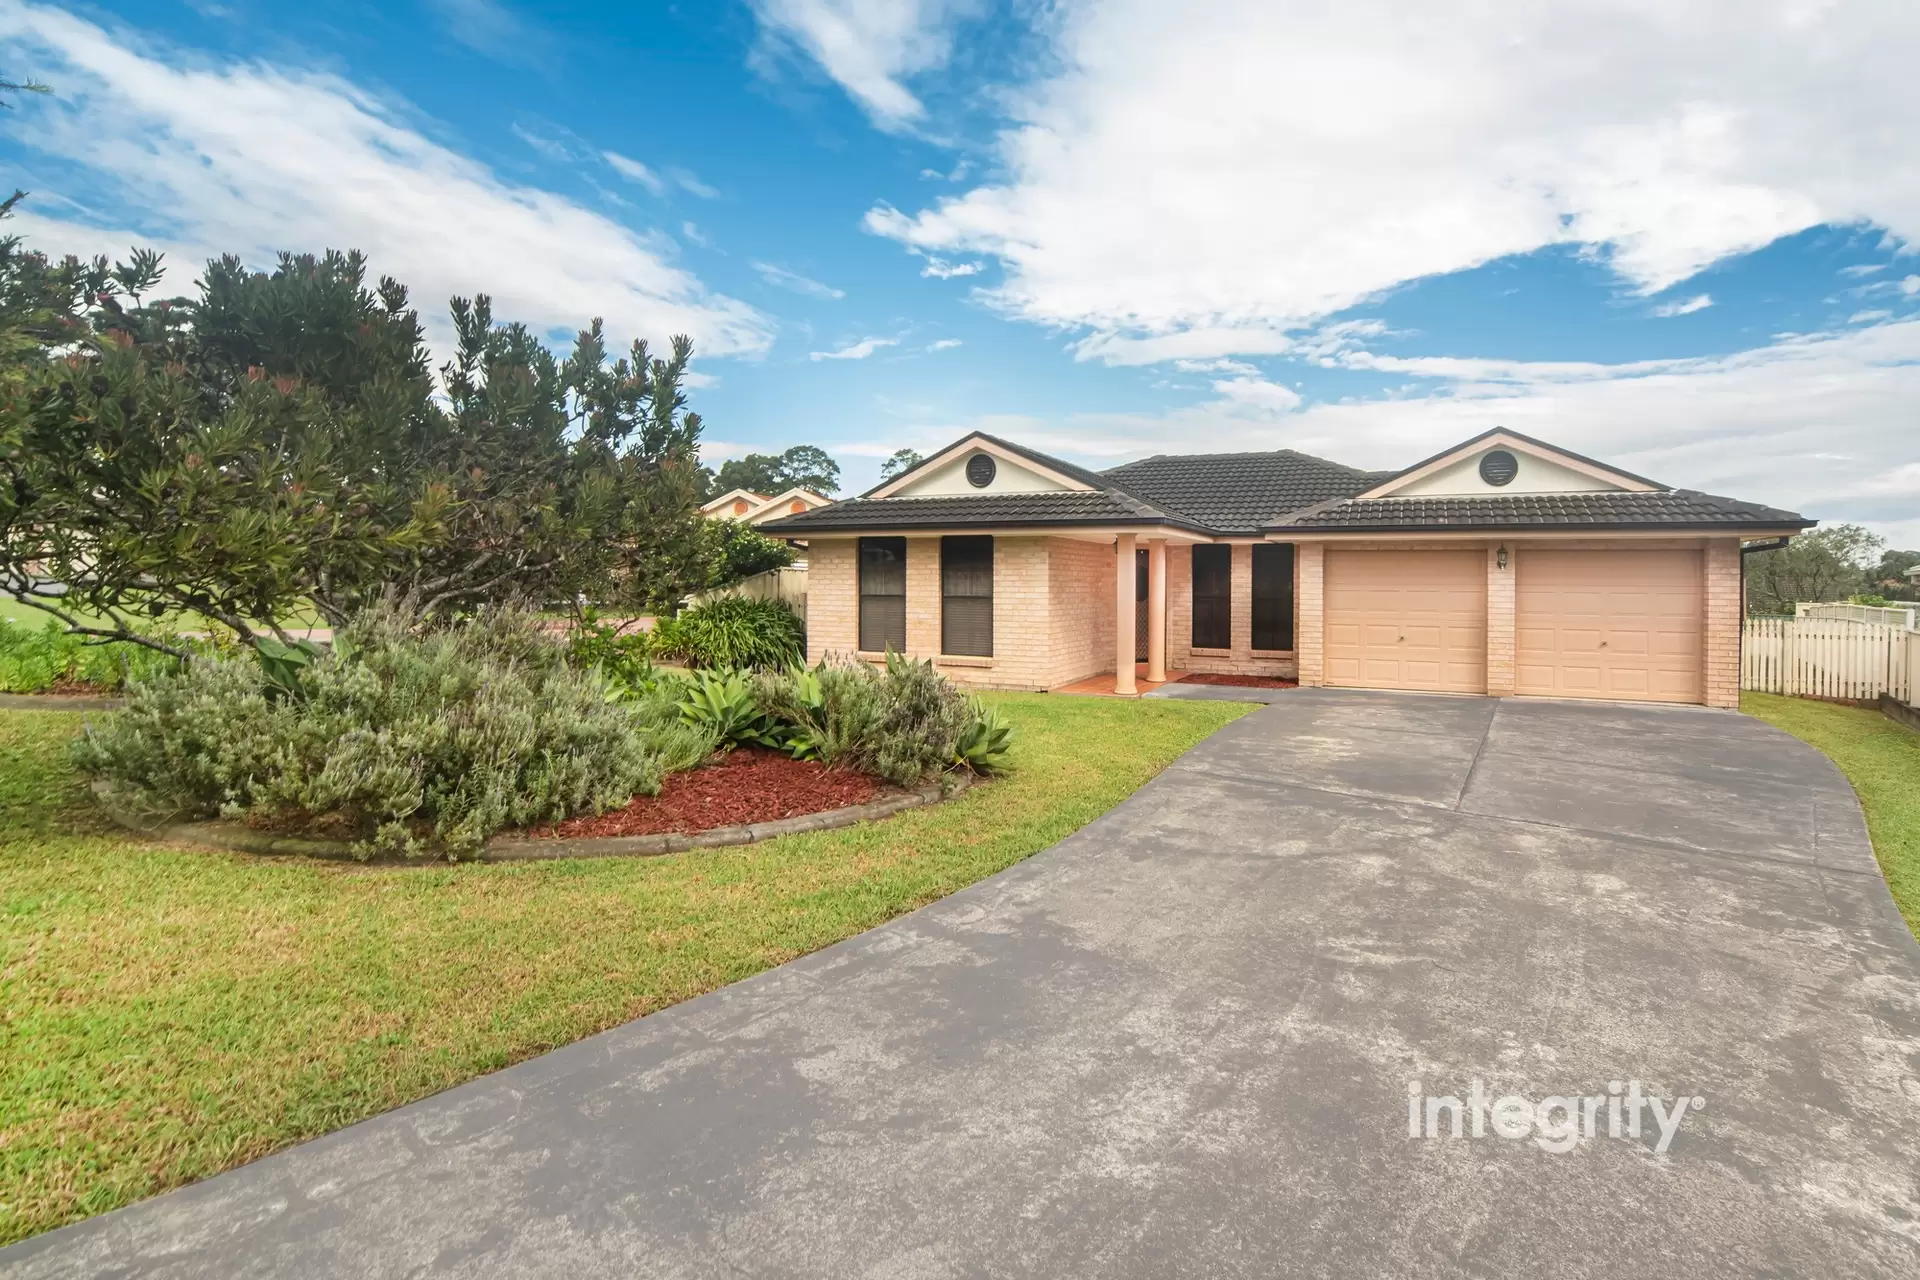 22 Robinia Way, Worrigee For Sale by Integrity Real Estate - image 1